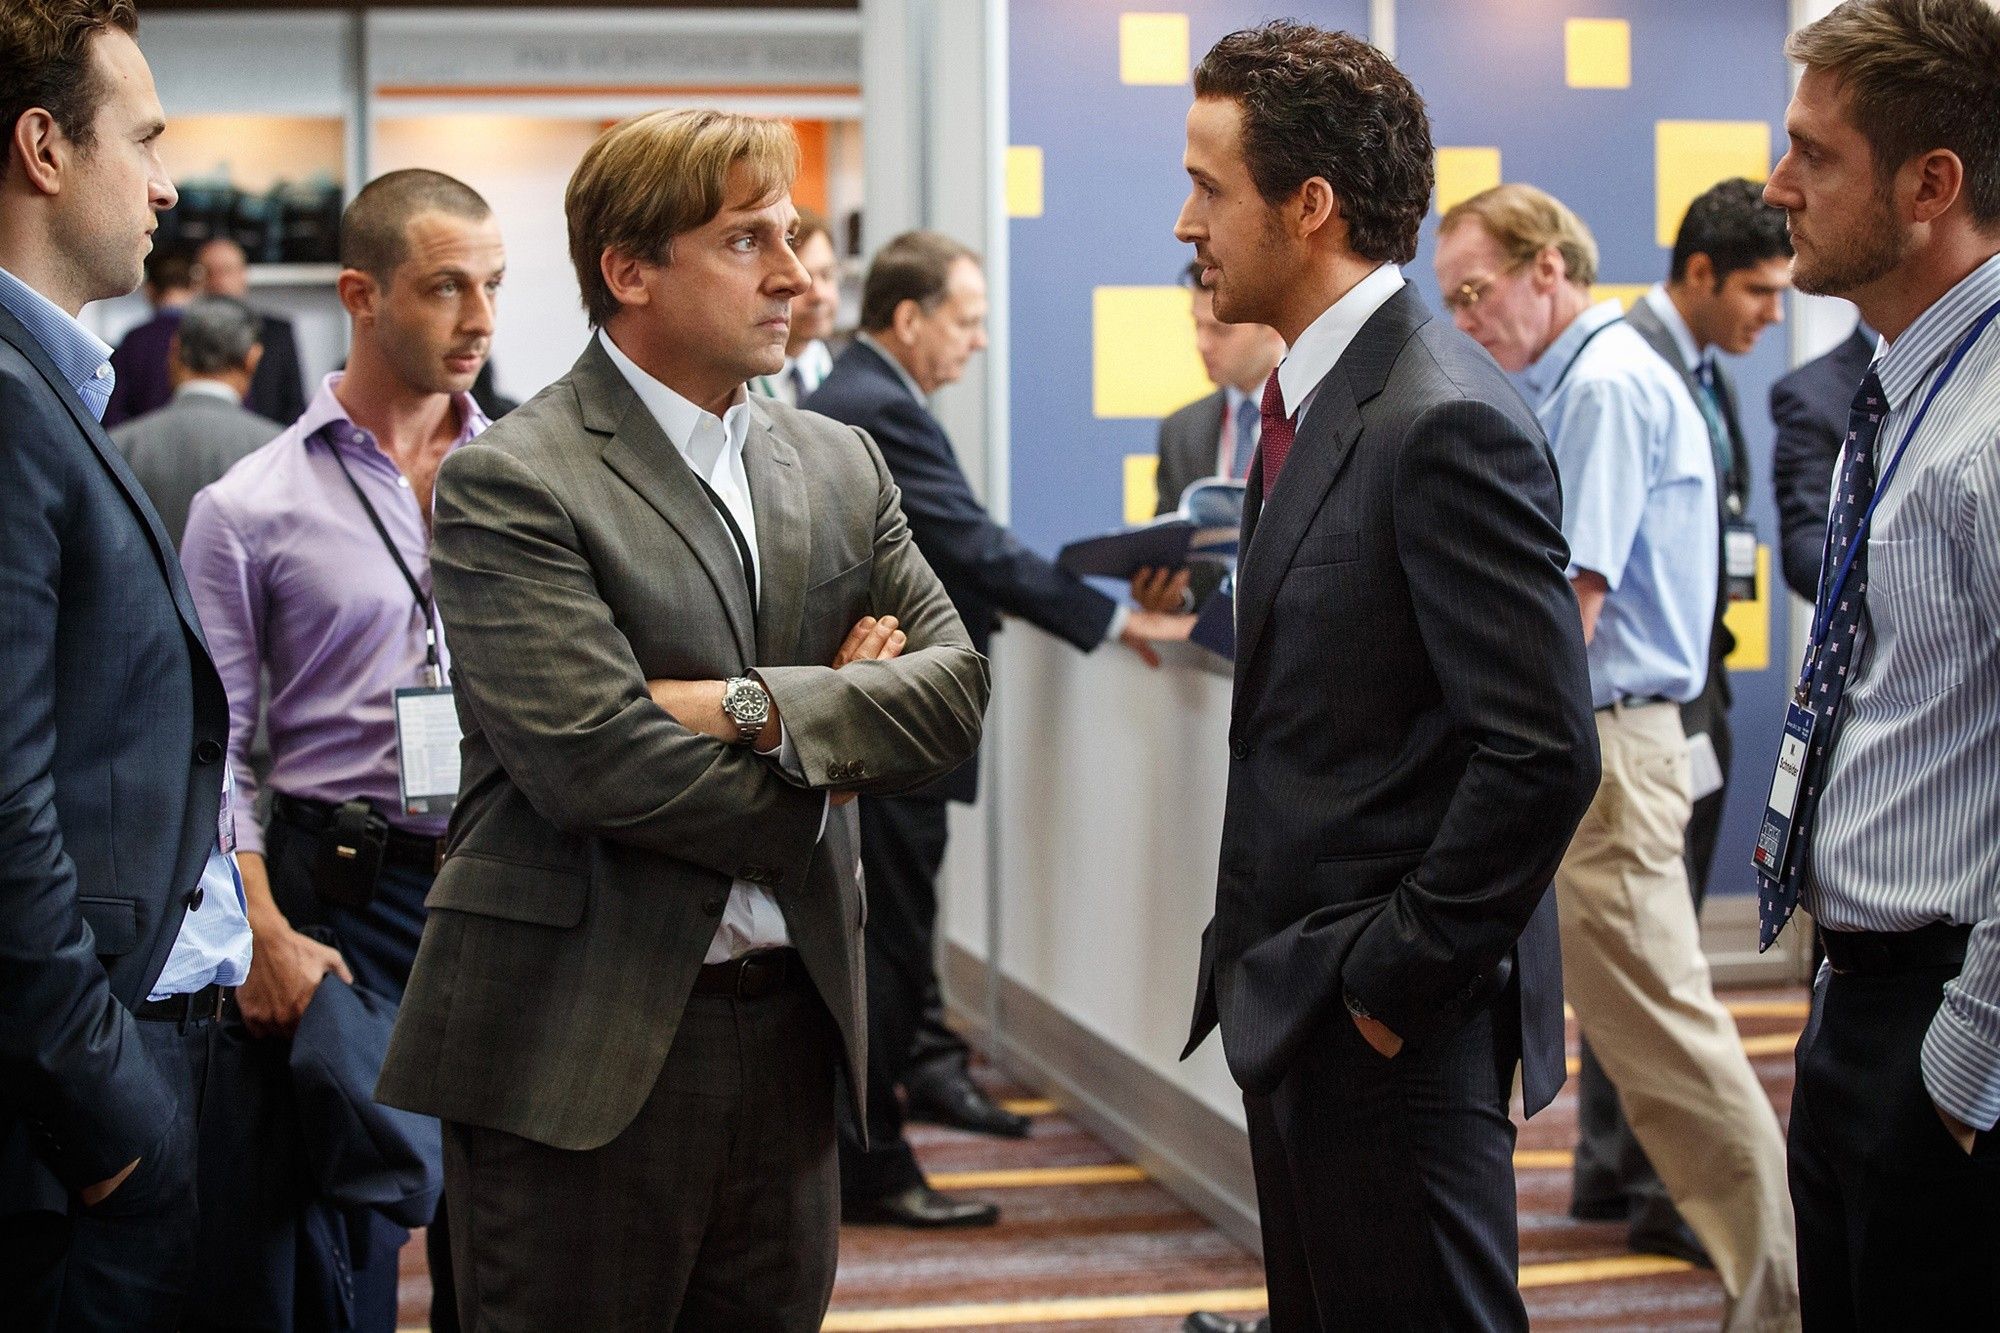 A scene from Paramount Pictures' The Big Short (2015)